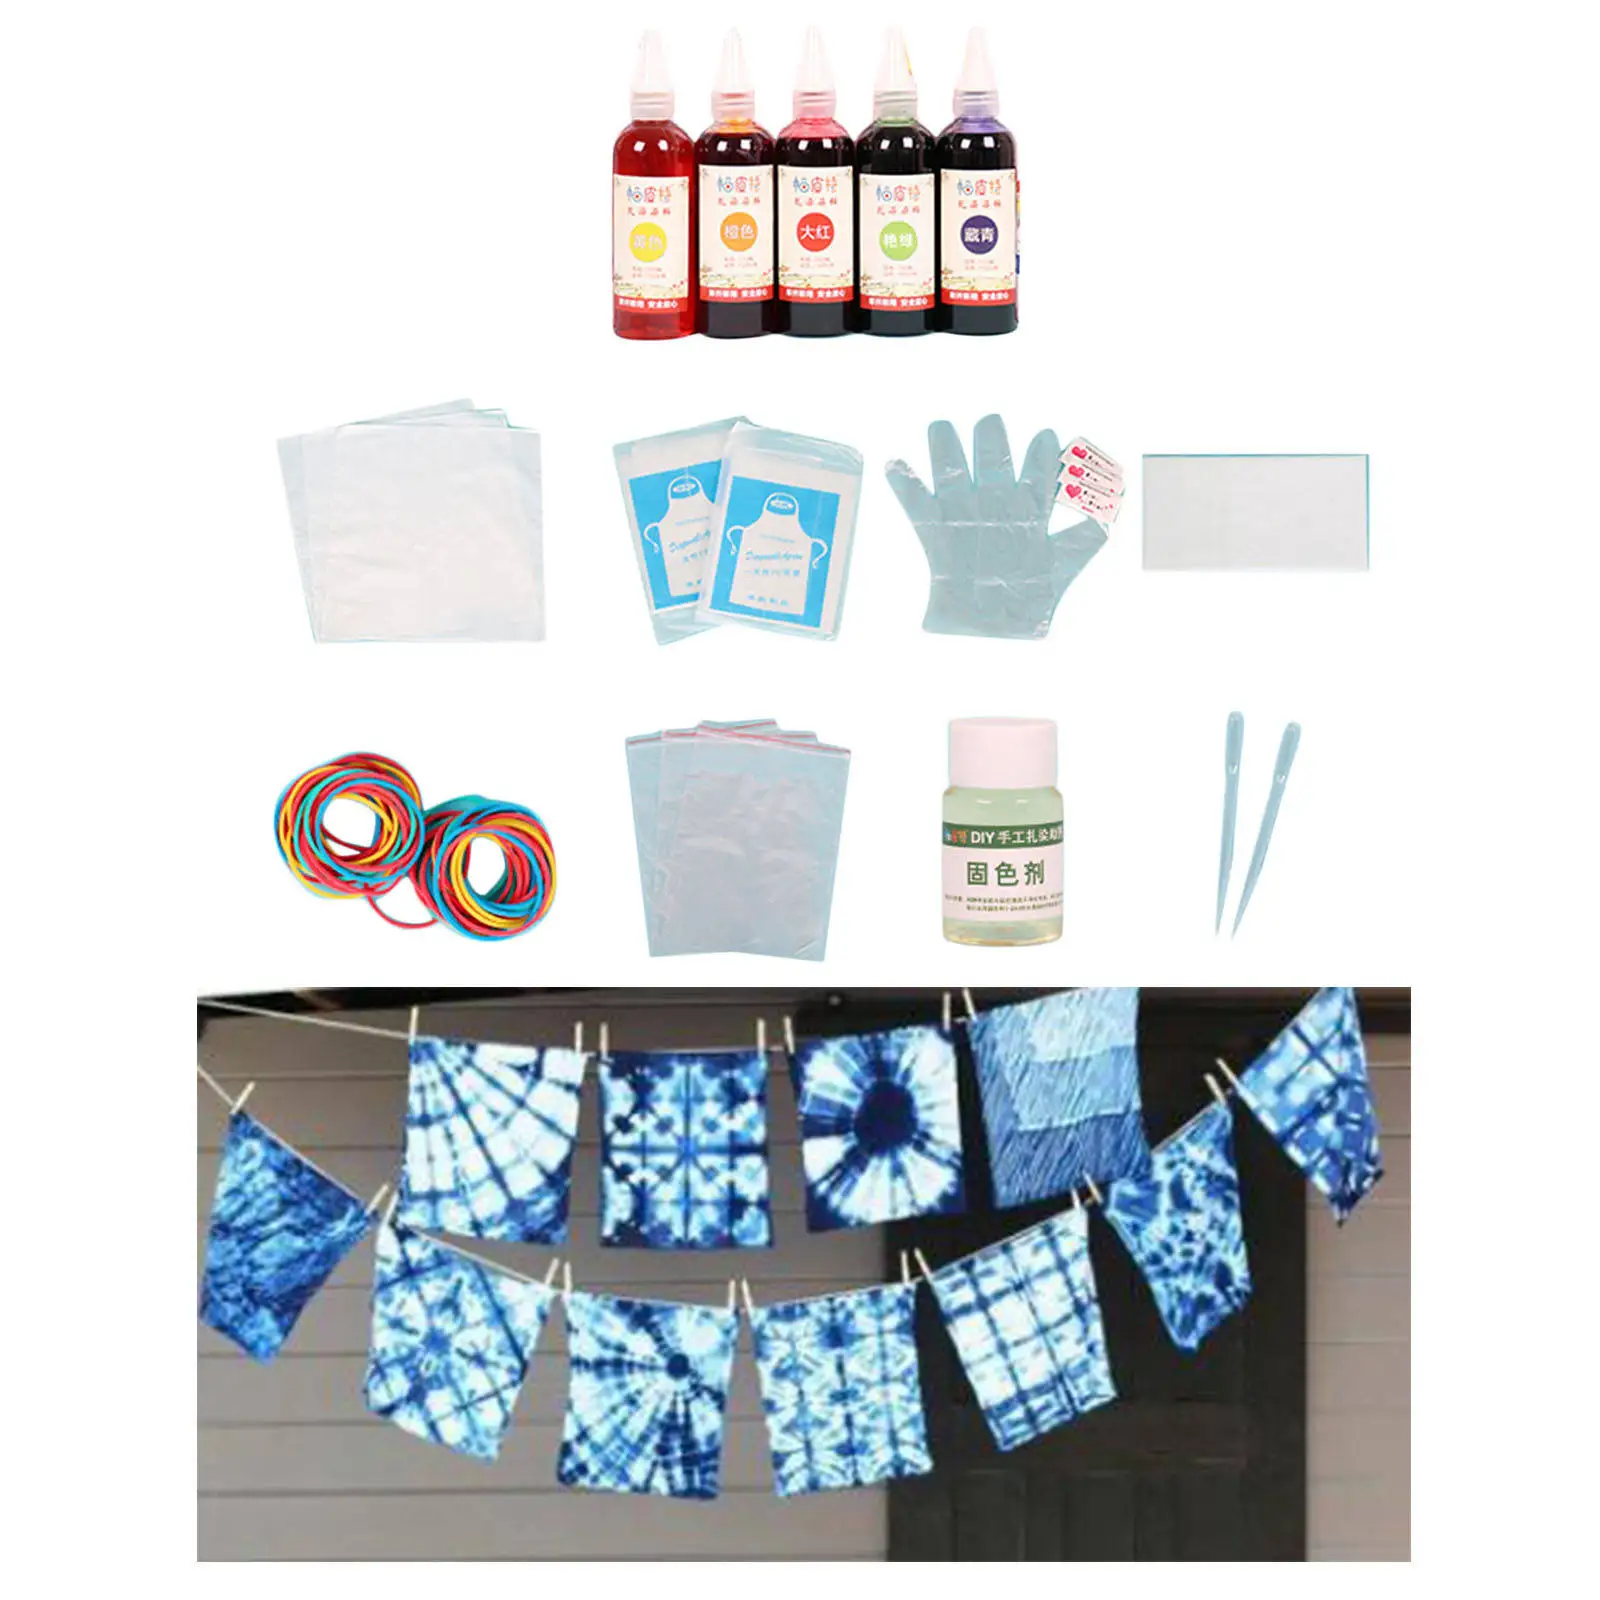 5 Colors Tie Dye Kit Dyeing DIY Art Craft Fabric Dye Set Permanent Paint for T-Shirts Accessories Kids Adults Party Supplies